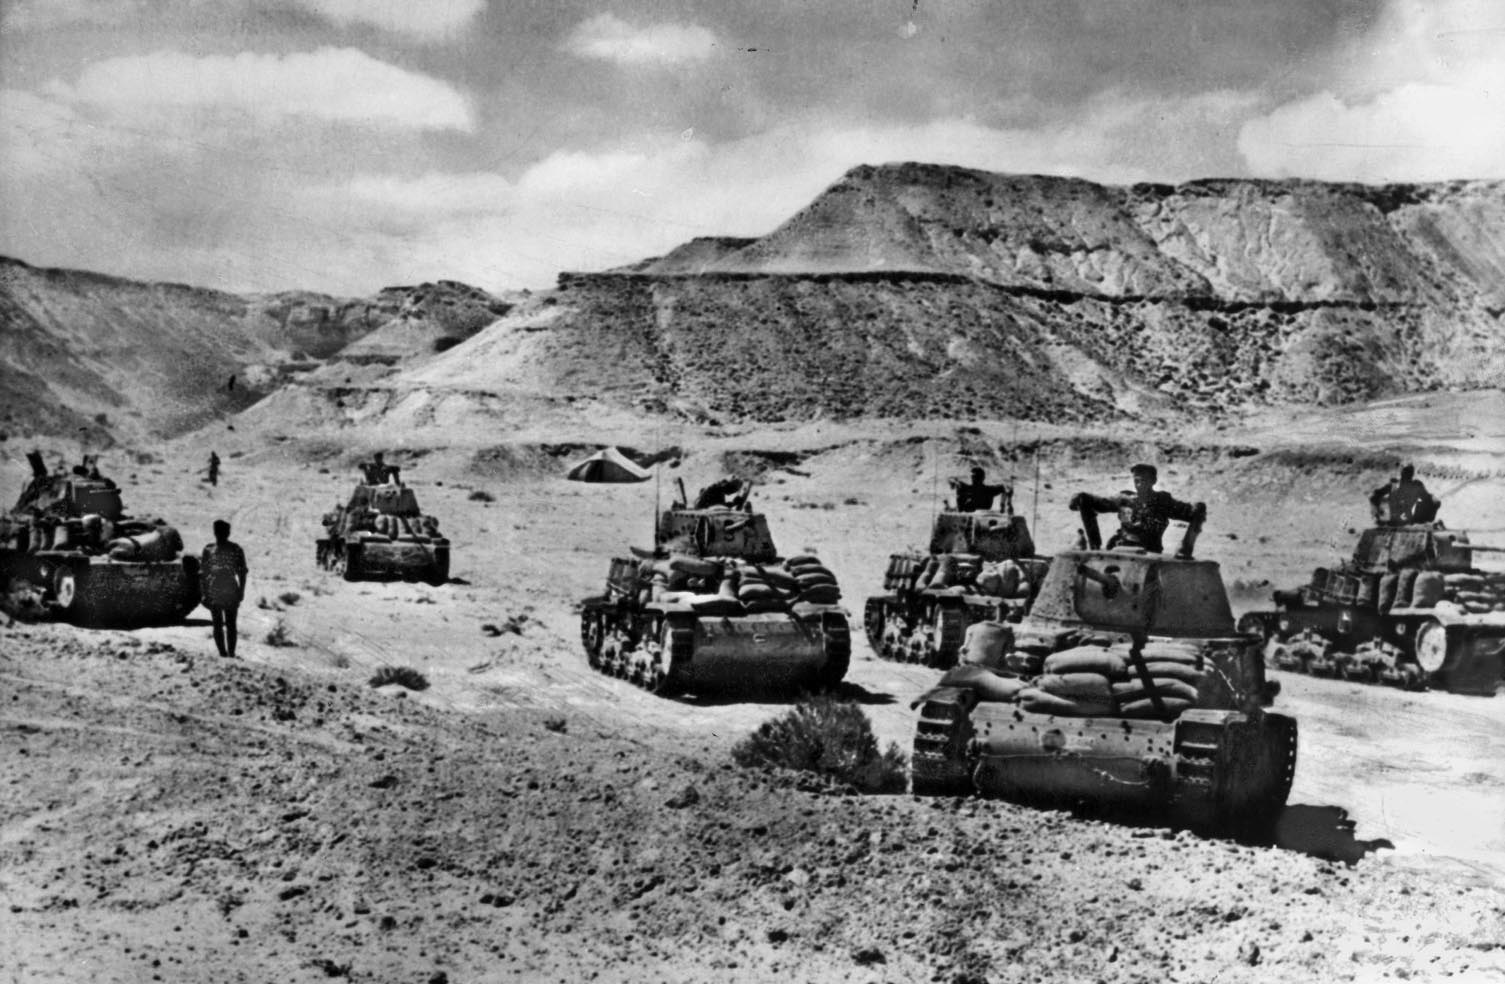 Italian tanks, carrying sandbags for better traction and protection, advance through a depression along the El Alamein line. The depressions—which featured escarpments and fine powdered sand—were difficult for armor to traverse.